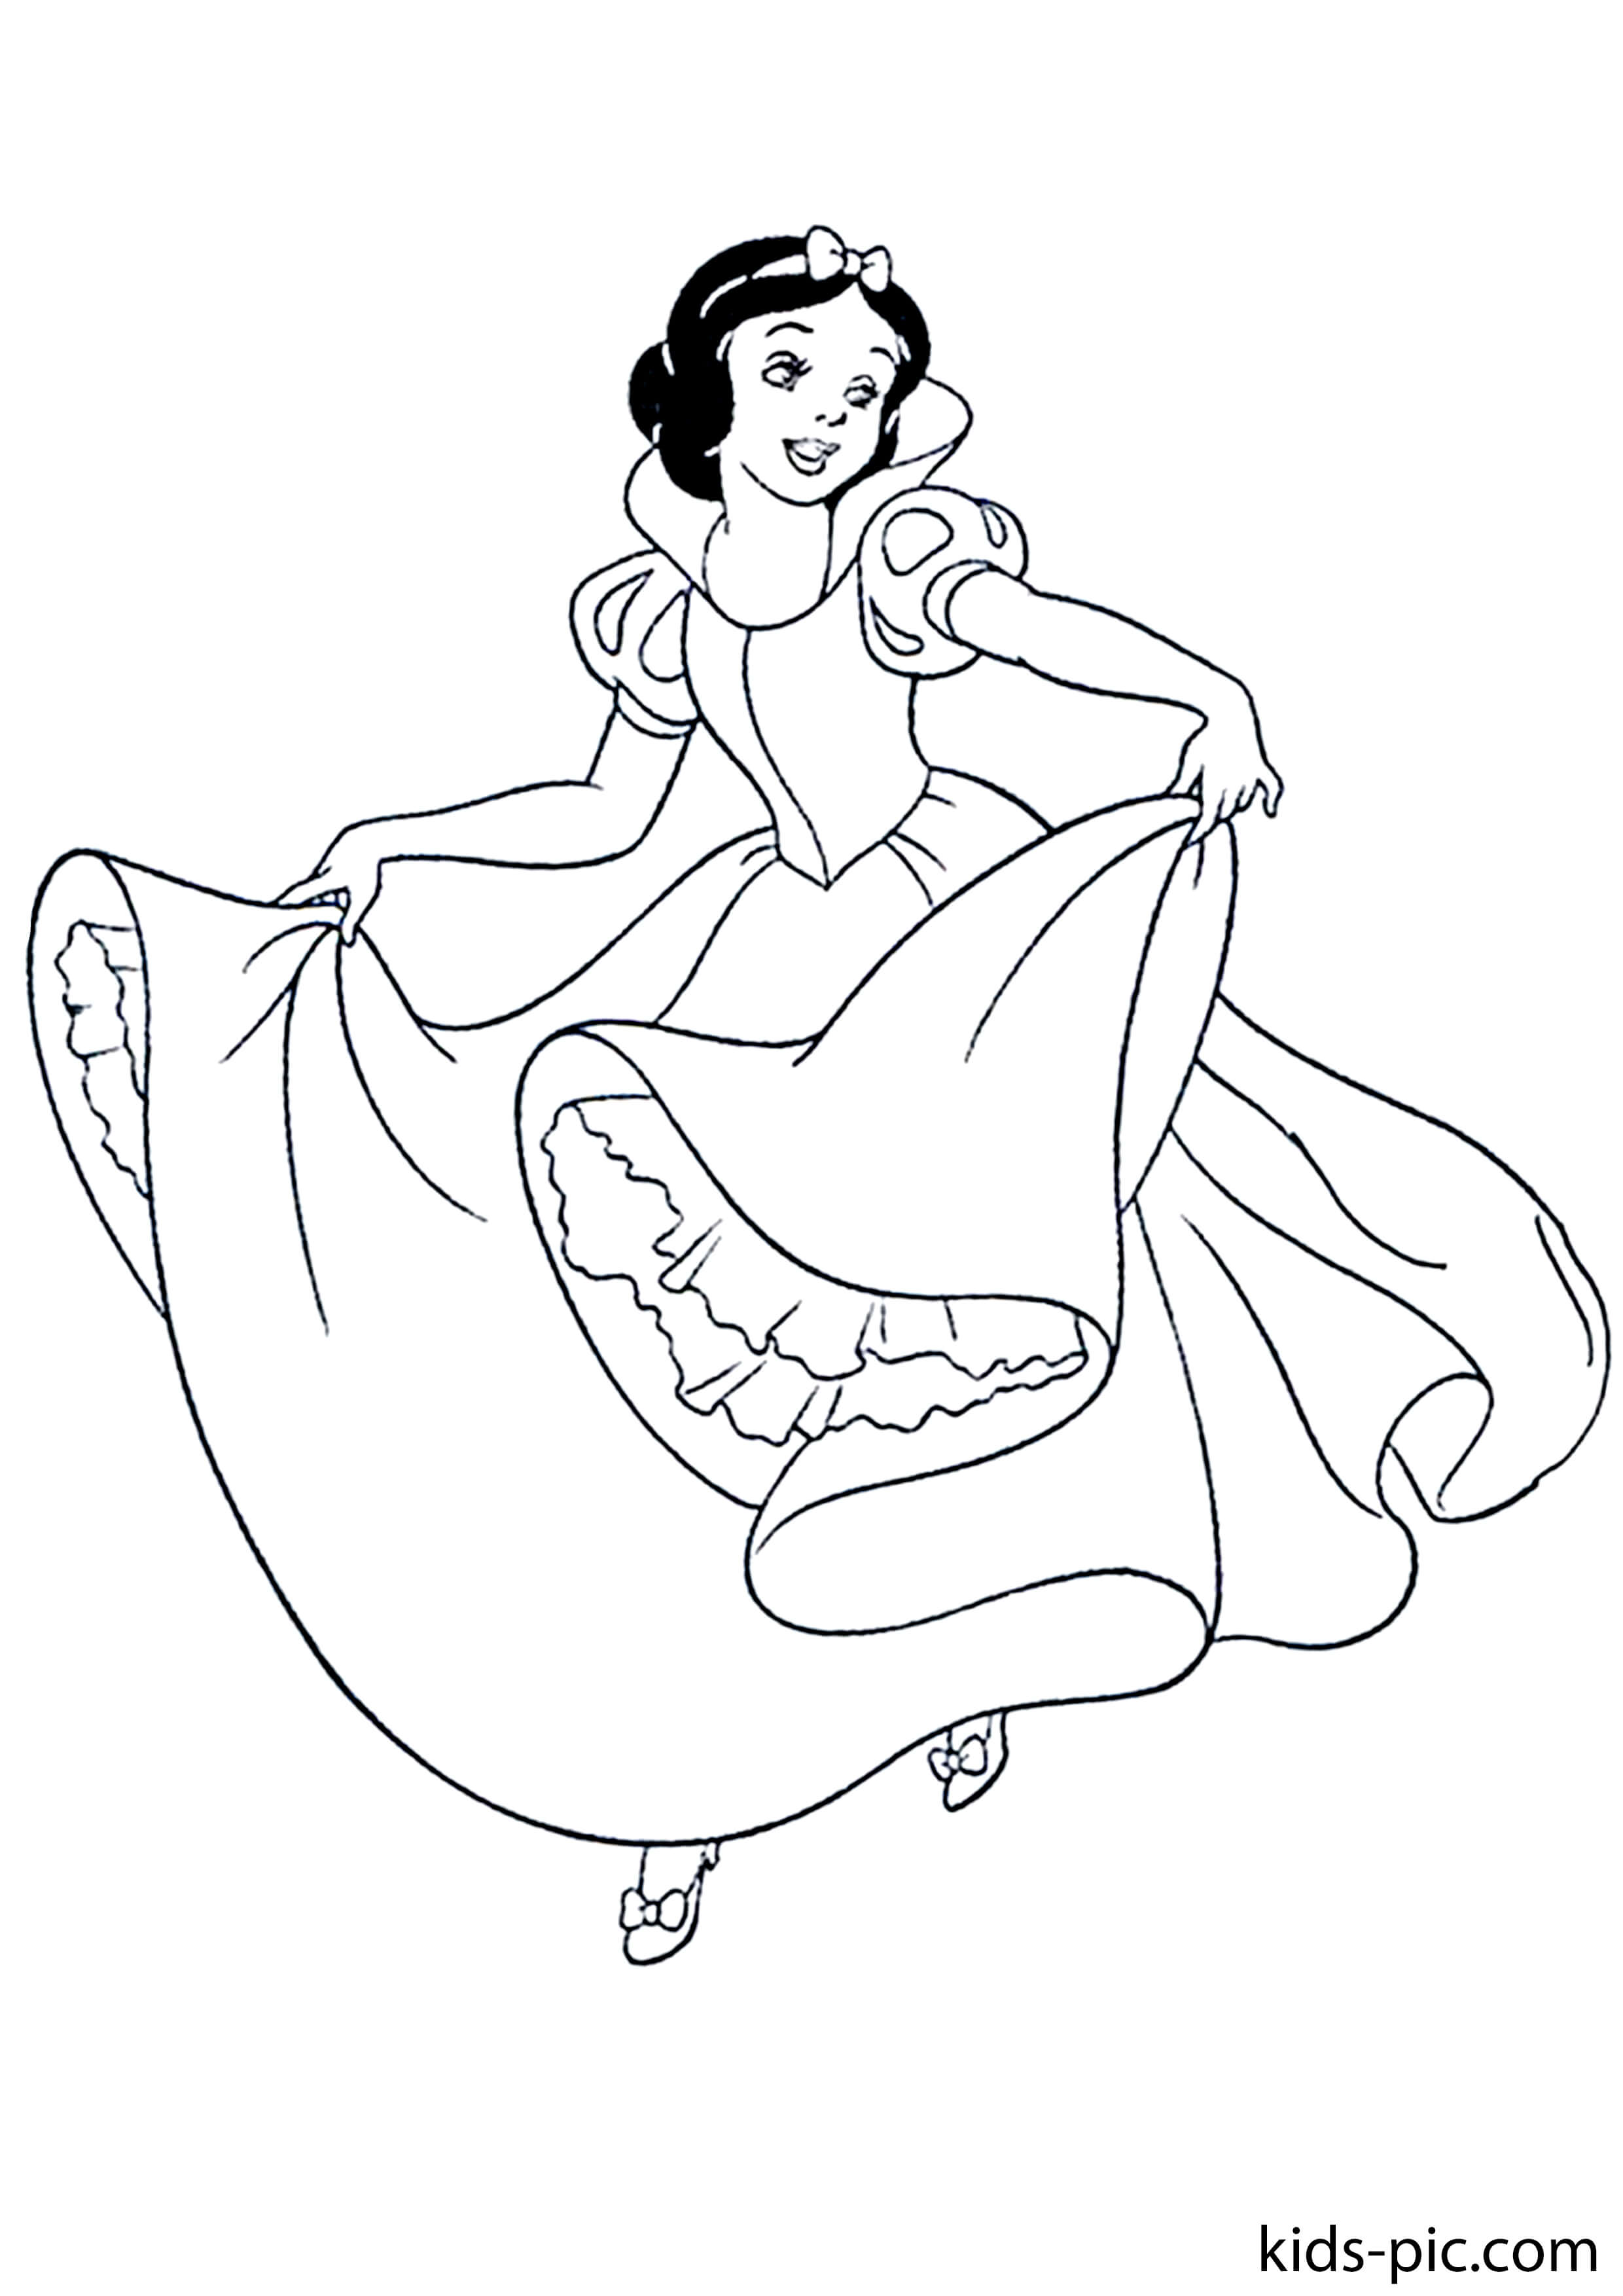 Free Printable Snow White Coloring Pages   Kids Pic.com